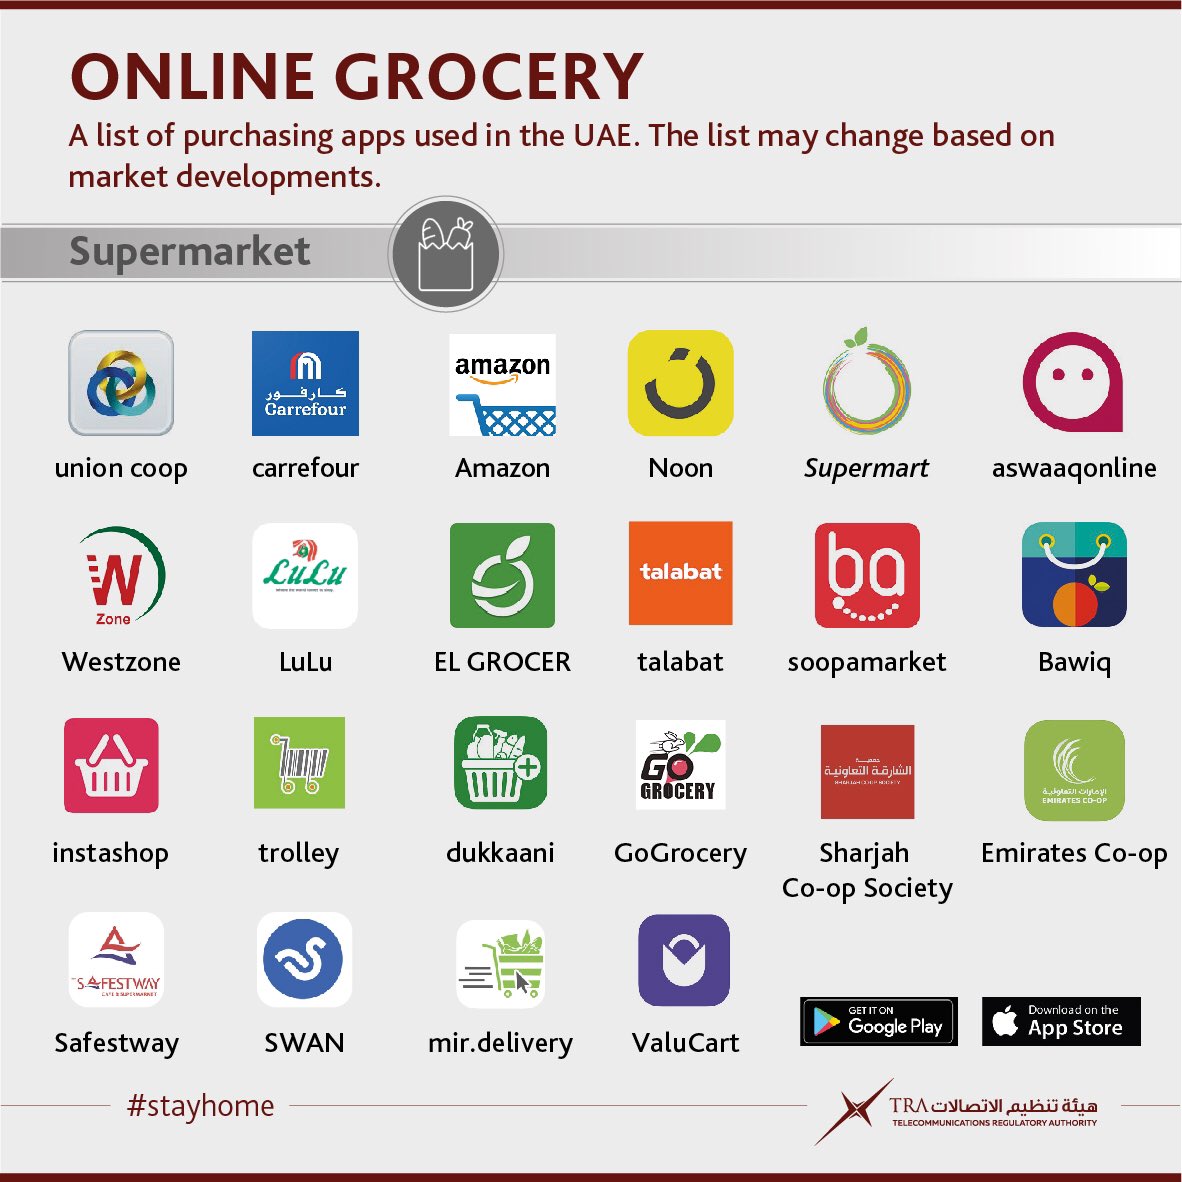 List of Online Grocery Apps so You Can Order Your Needs to Stay Home